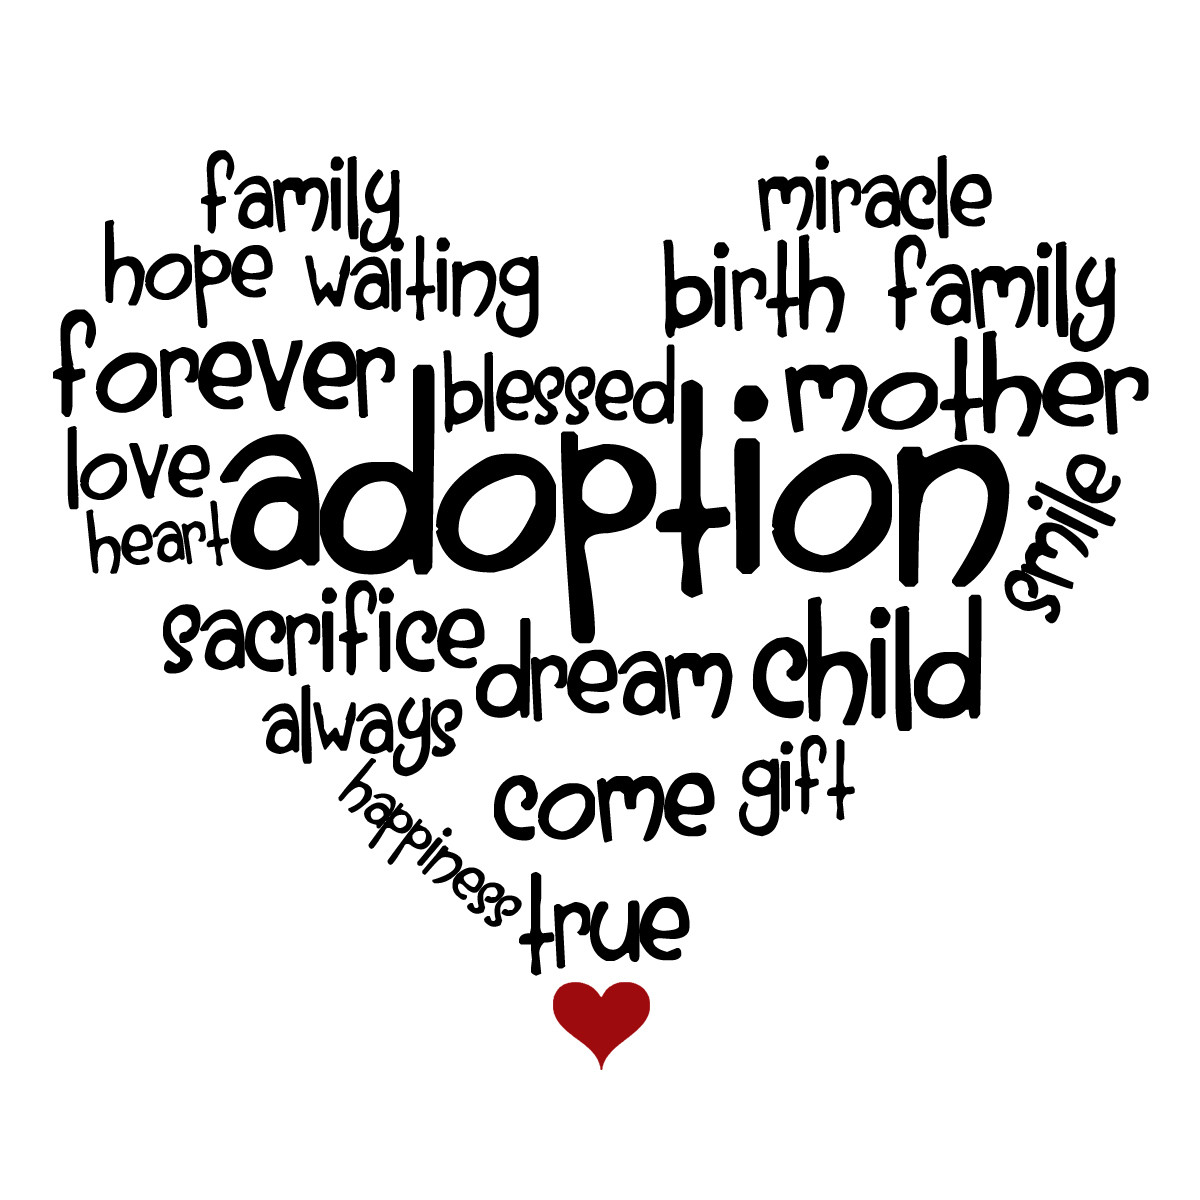 Adoption Quotes For Birth Mothers
 Adoption Birth Mother Quotes Inspirational QuotesGram